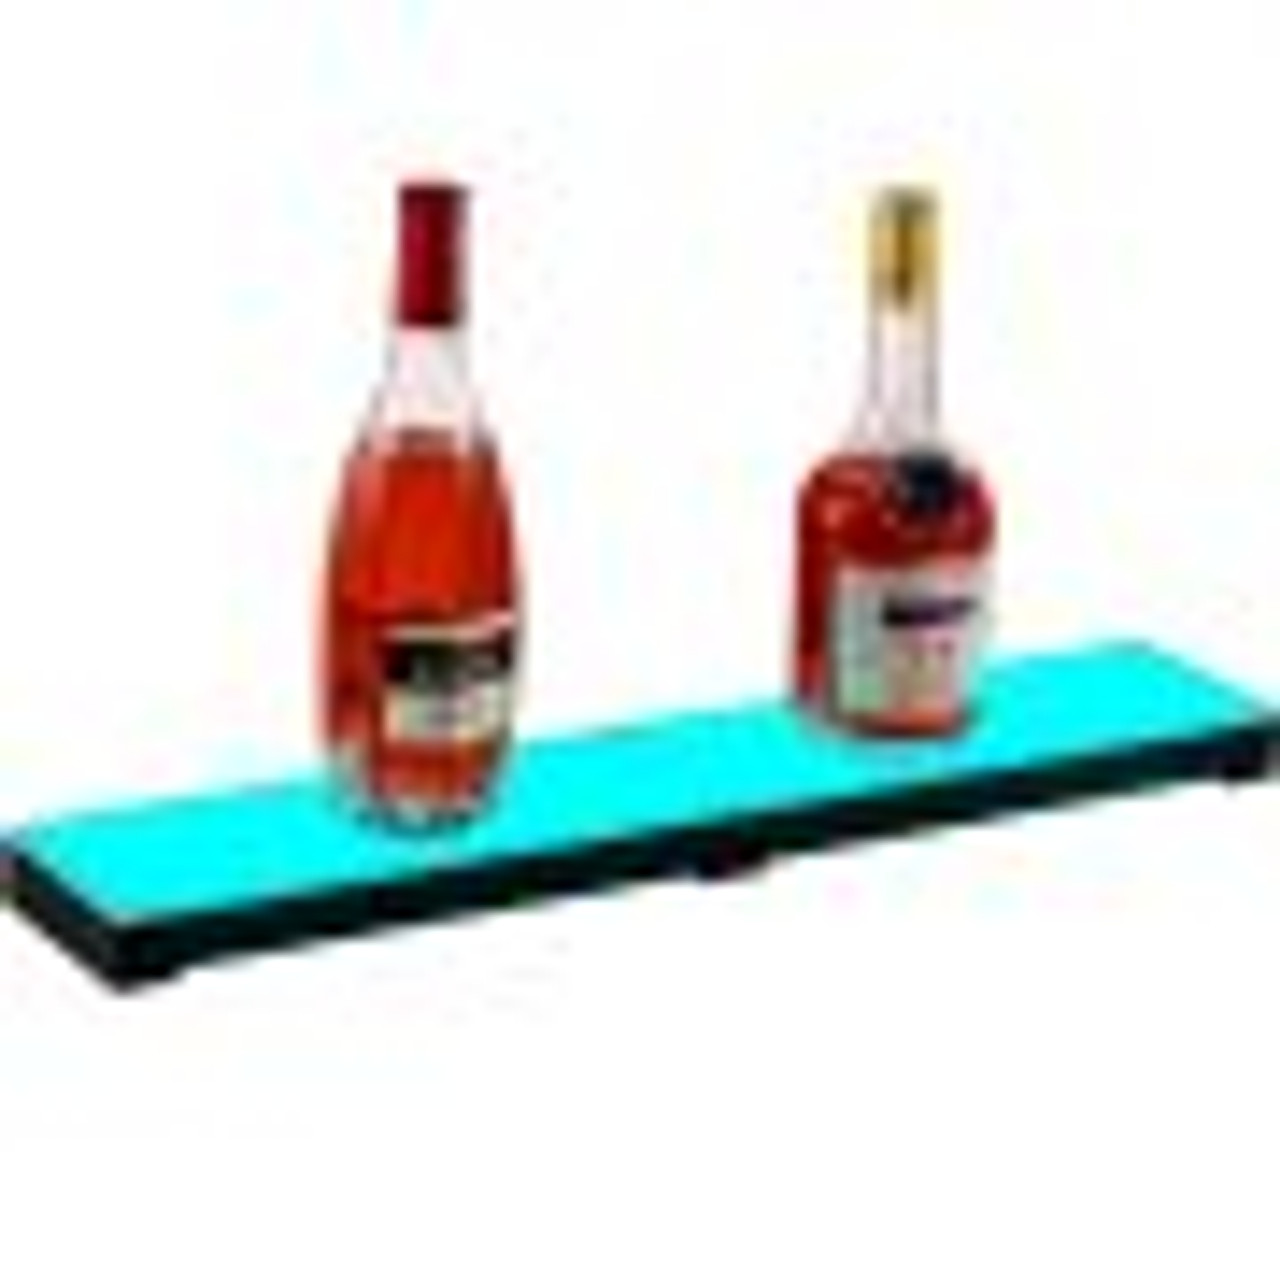 LED Lighted Liquor Bottle Display Shelf, 24-inch LED Bar Shelves for Liquor, 1-Step Lighted Liquor Bottle Shelf for Home/Commercial Bar, Acrylic Lighted Bottle Display with Remote & App Control